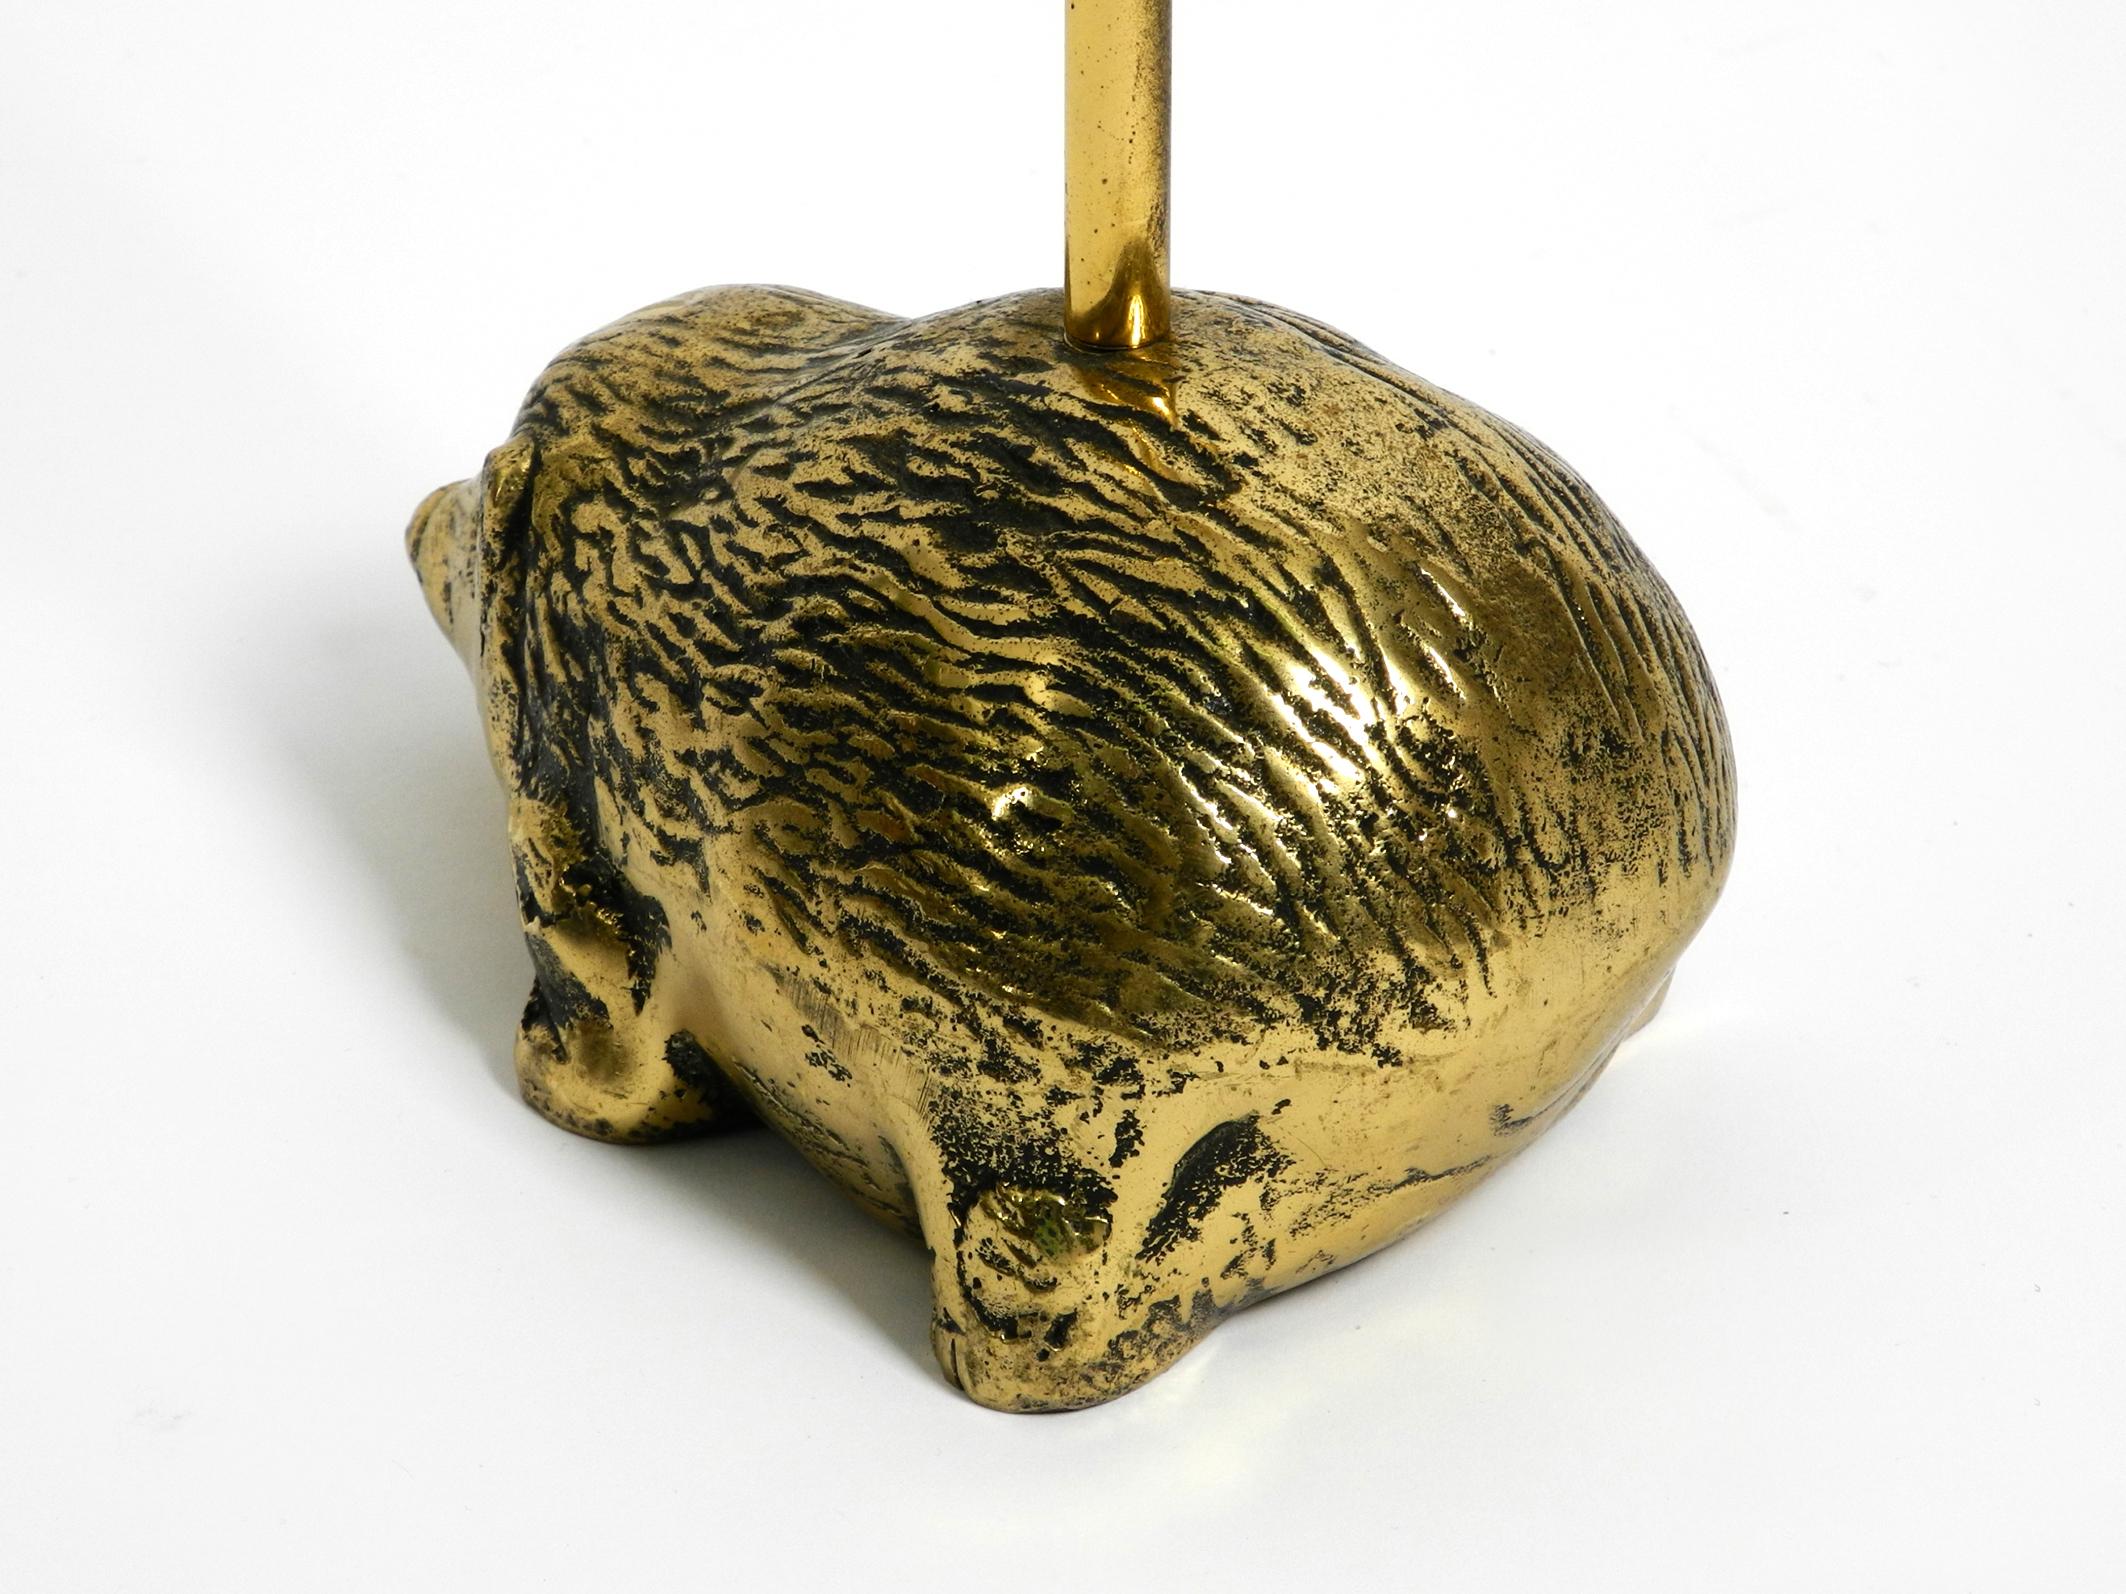 Mid-20th Century Rare, Very Heavy 1960s Doorstop Made of Solid Brass in the Shape of a Hedgehog